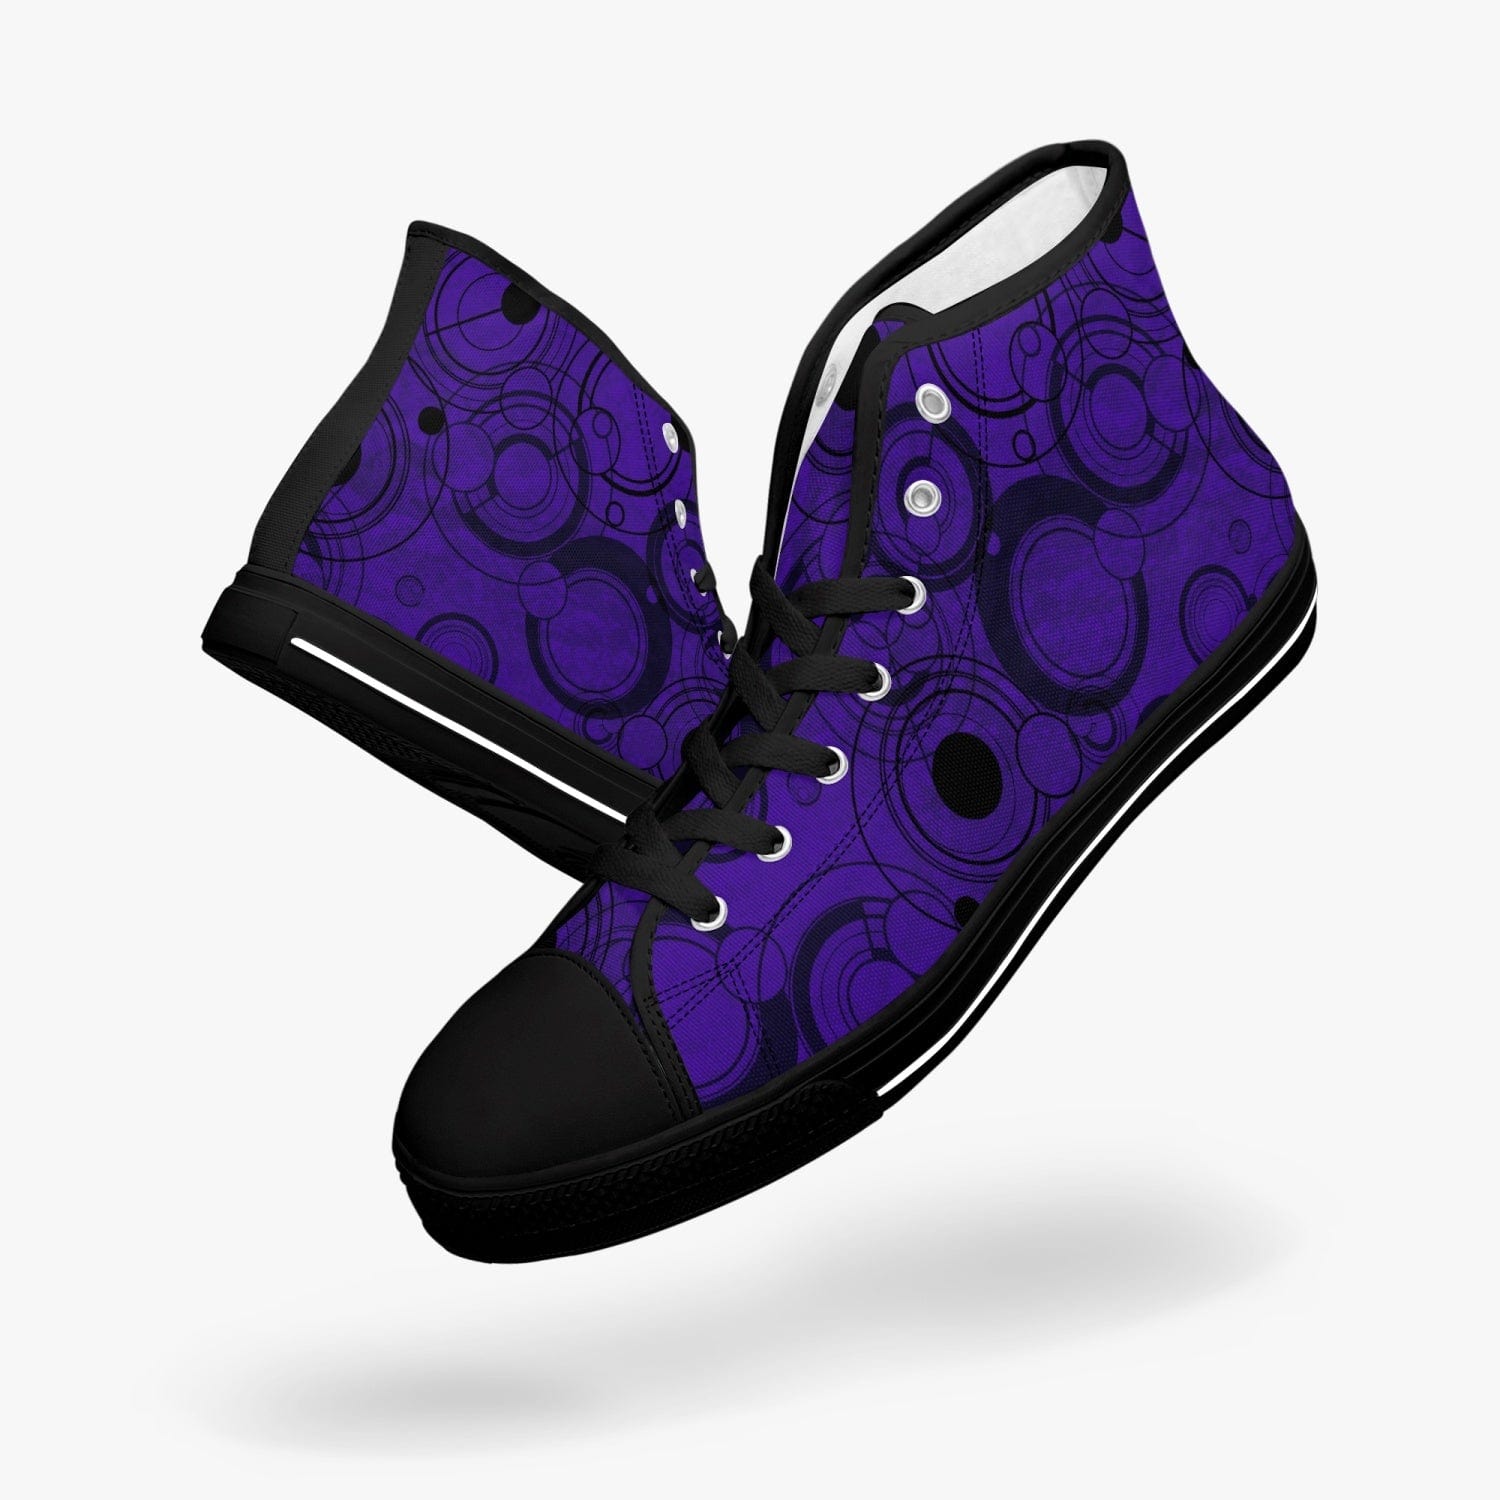 Women's Time Lord Gallifreyan Gallifrey language retro sneakers in a vivid gothic purple at Gallery Serpentine